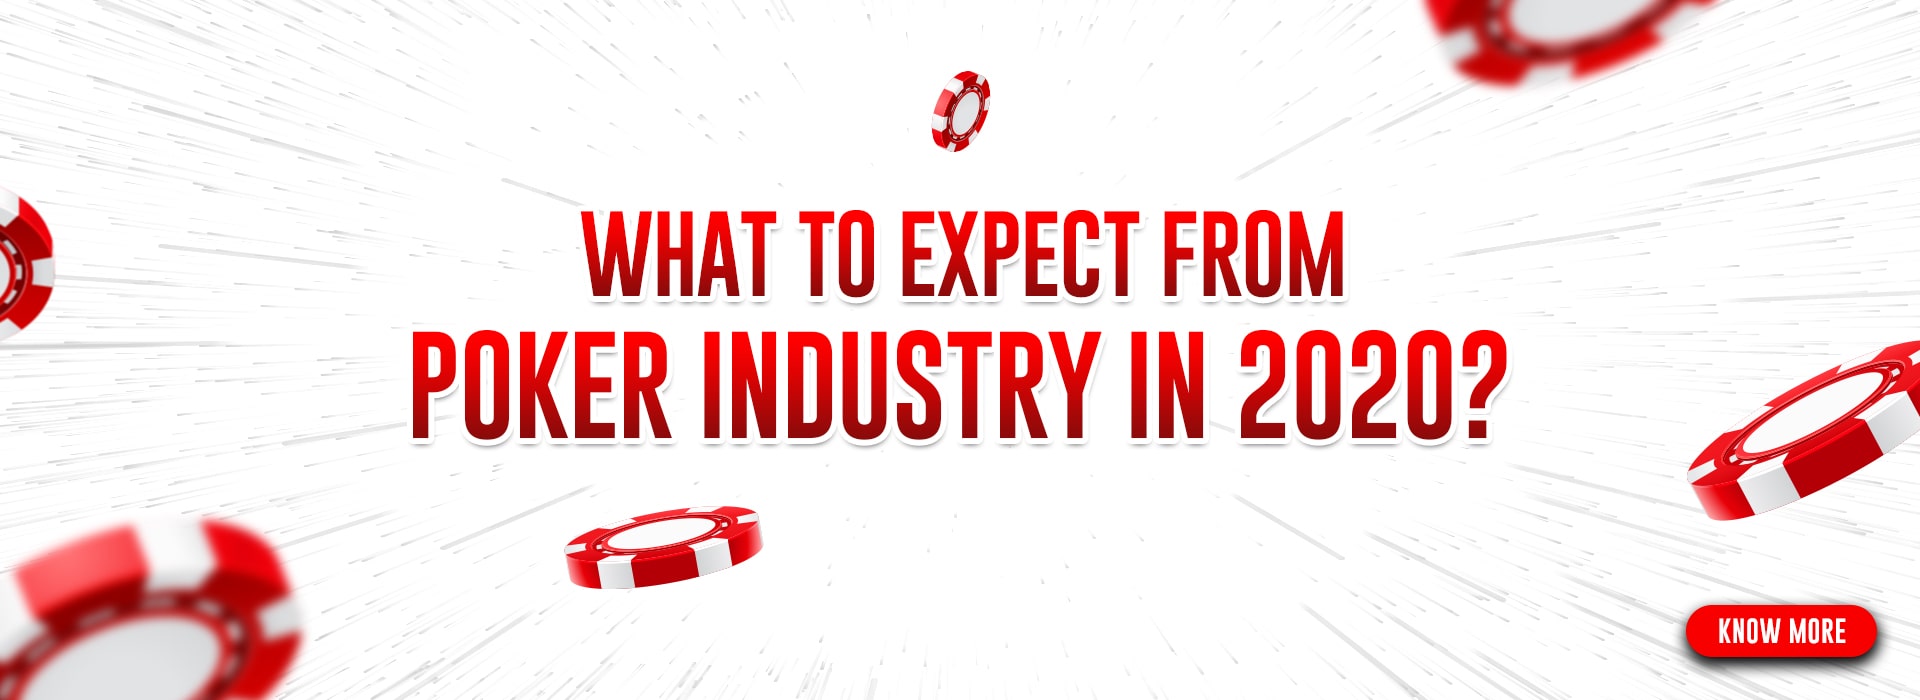 What to Expect From The Poker Industry in 2020?